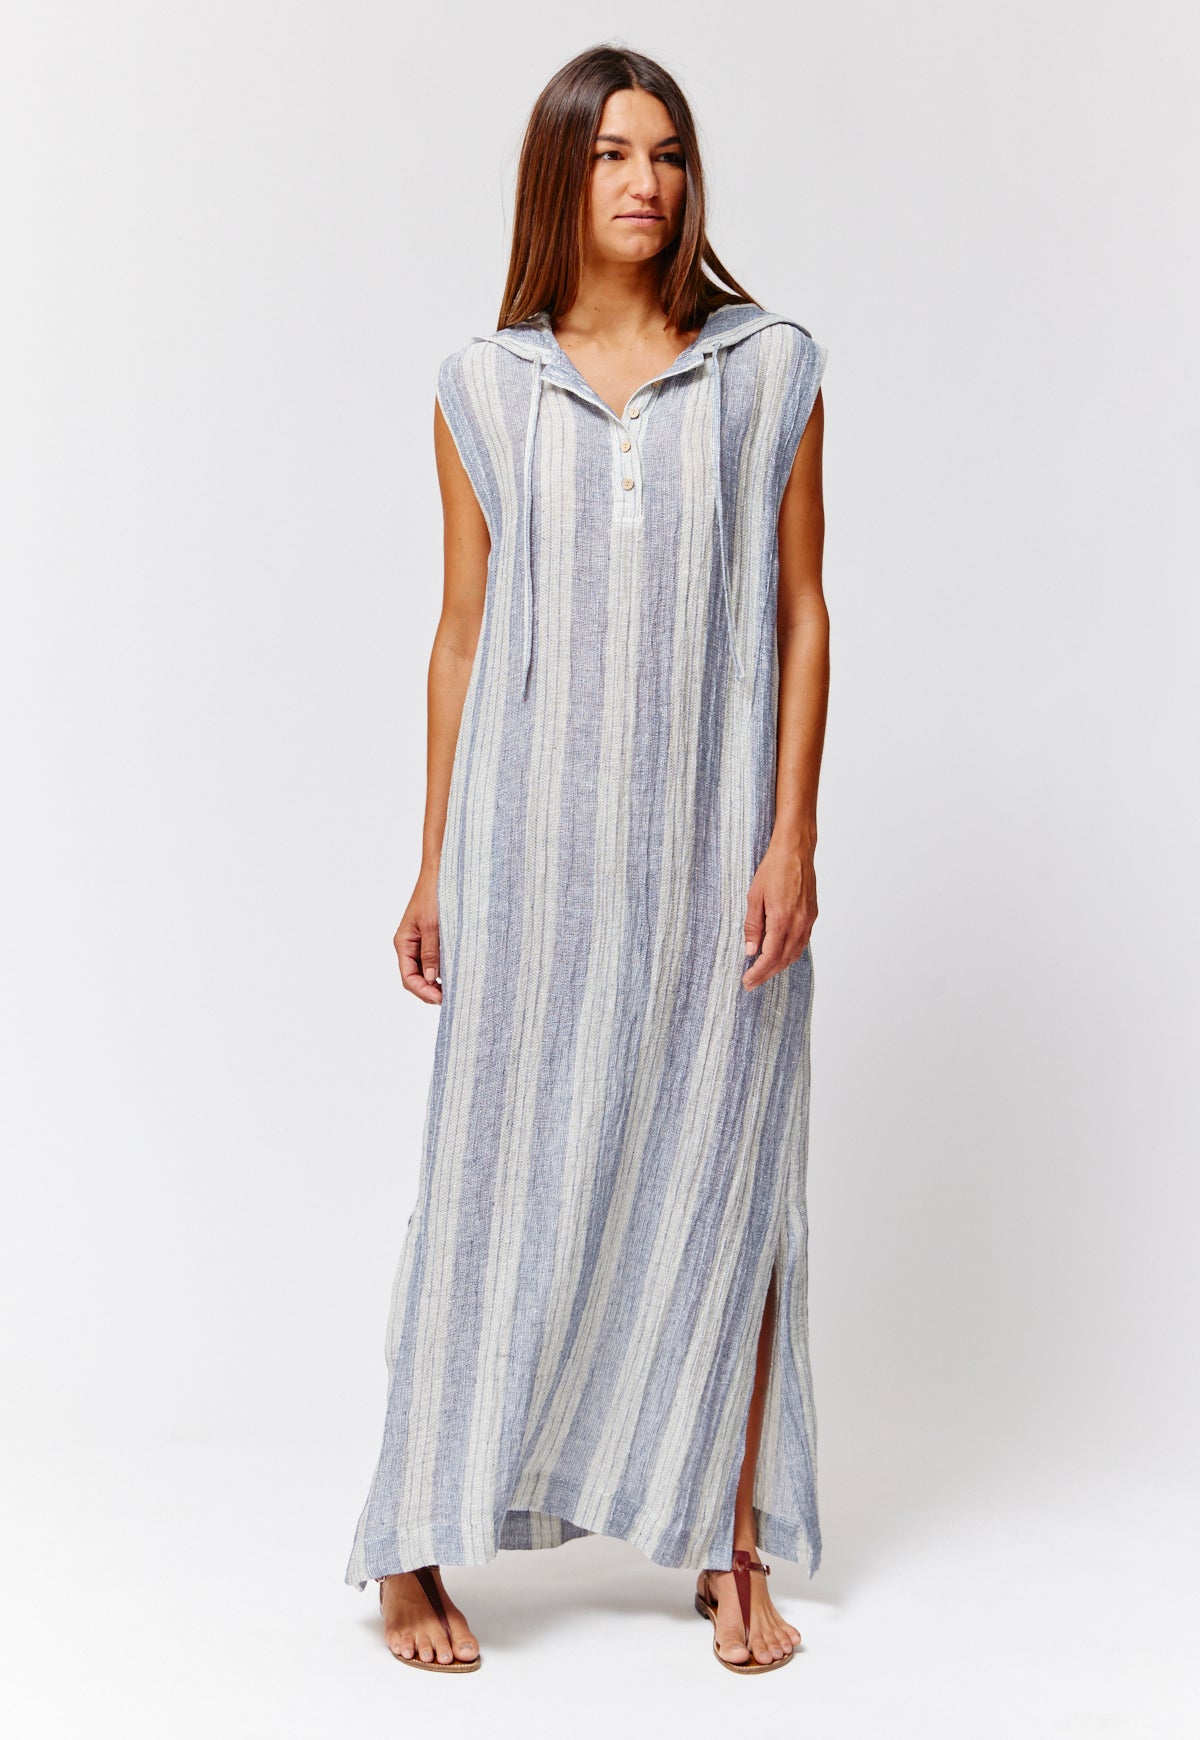 THE HENLEY CAFTAN in NAVY & NATURAL STRIPED CHIOS GAUZE